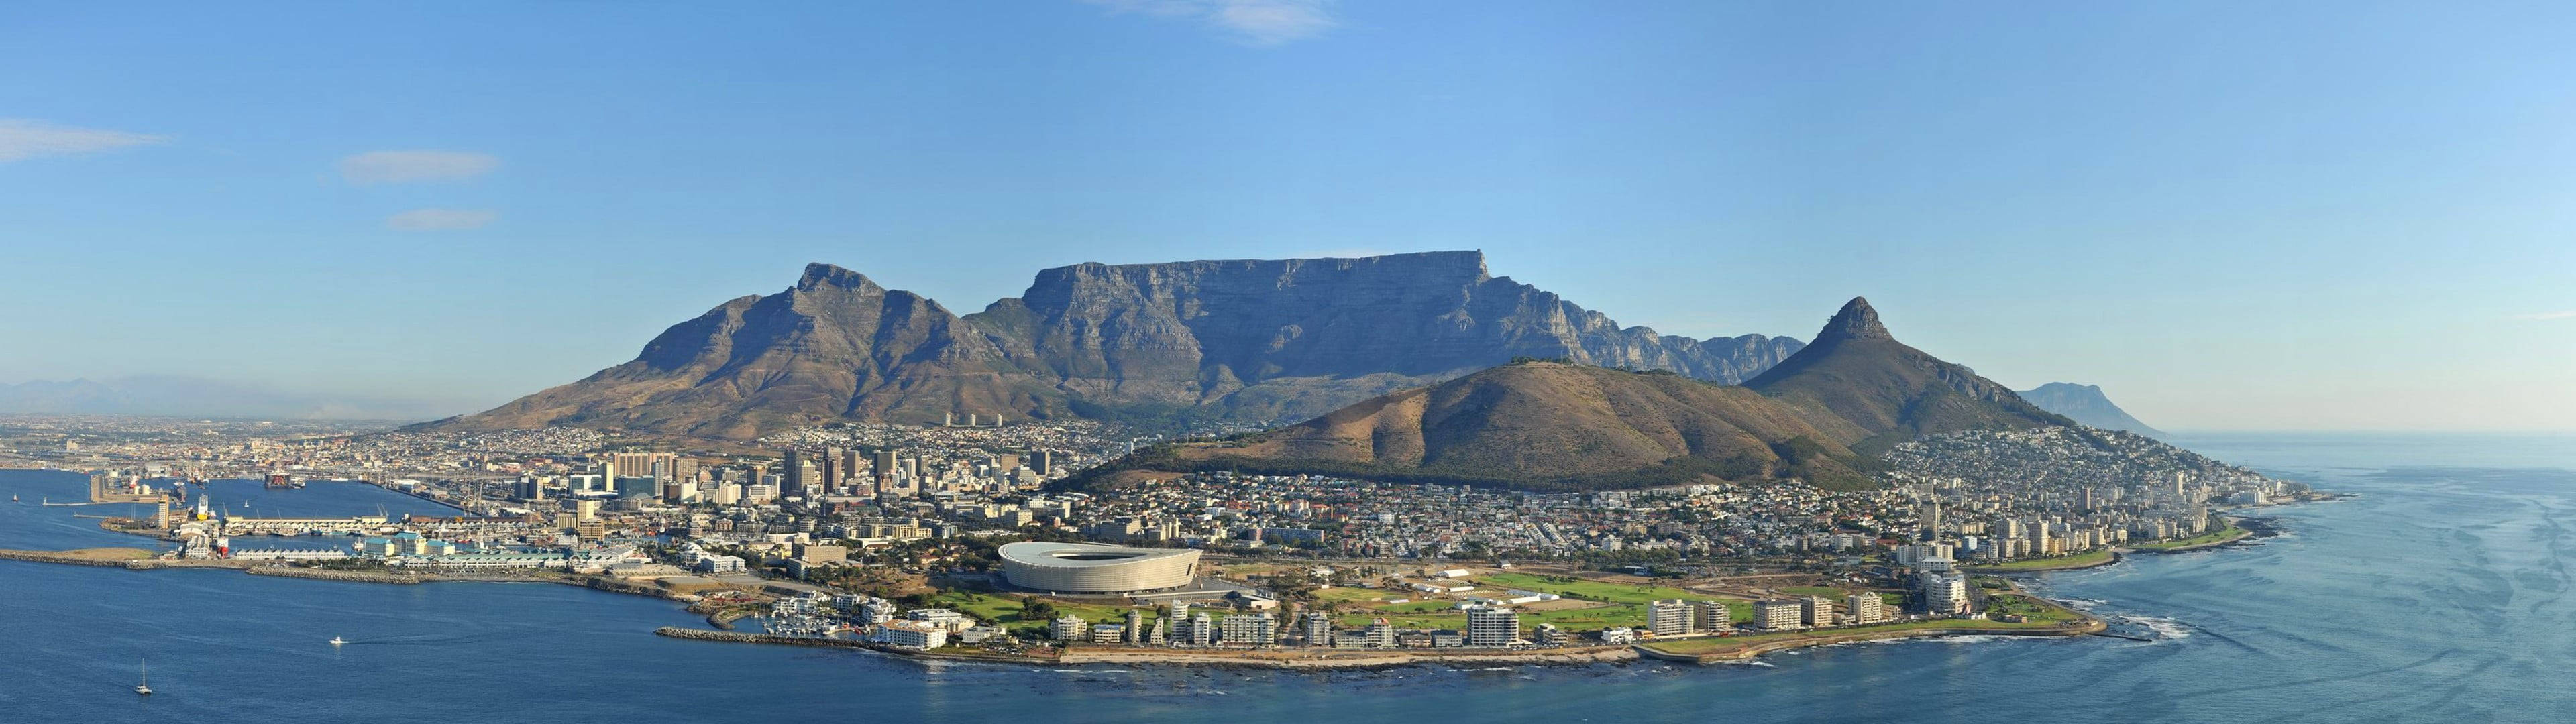 Cape Town South Africa Panorama Wallpaper